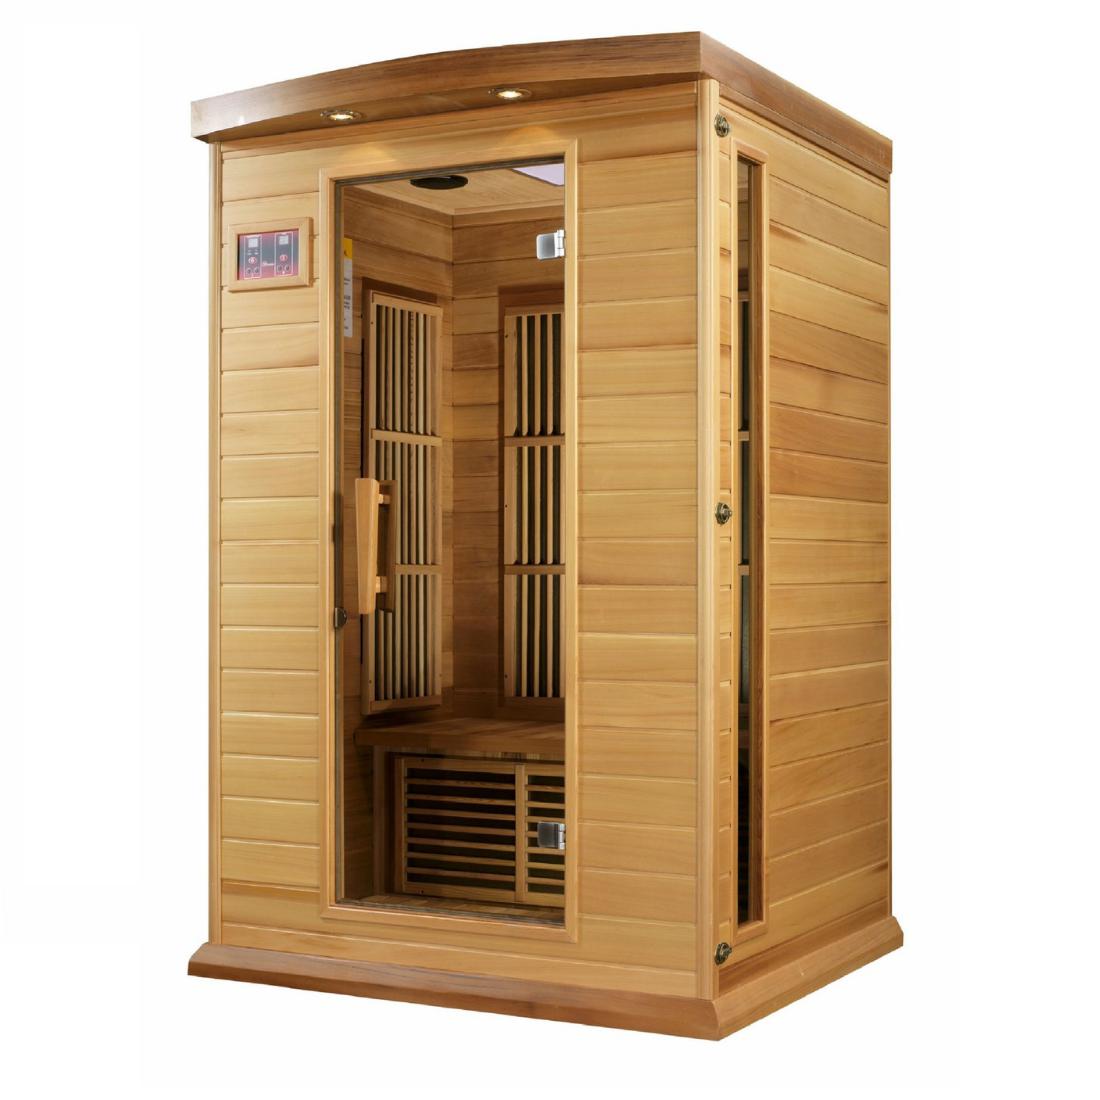 Maxxus 2 Person Low EMF Infrared Sauna in Canadian Red Cedar, MX-K206-01 CED Angle View